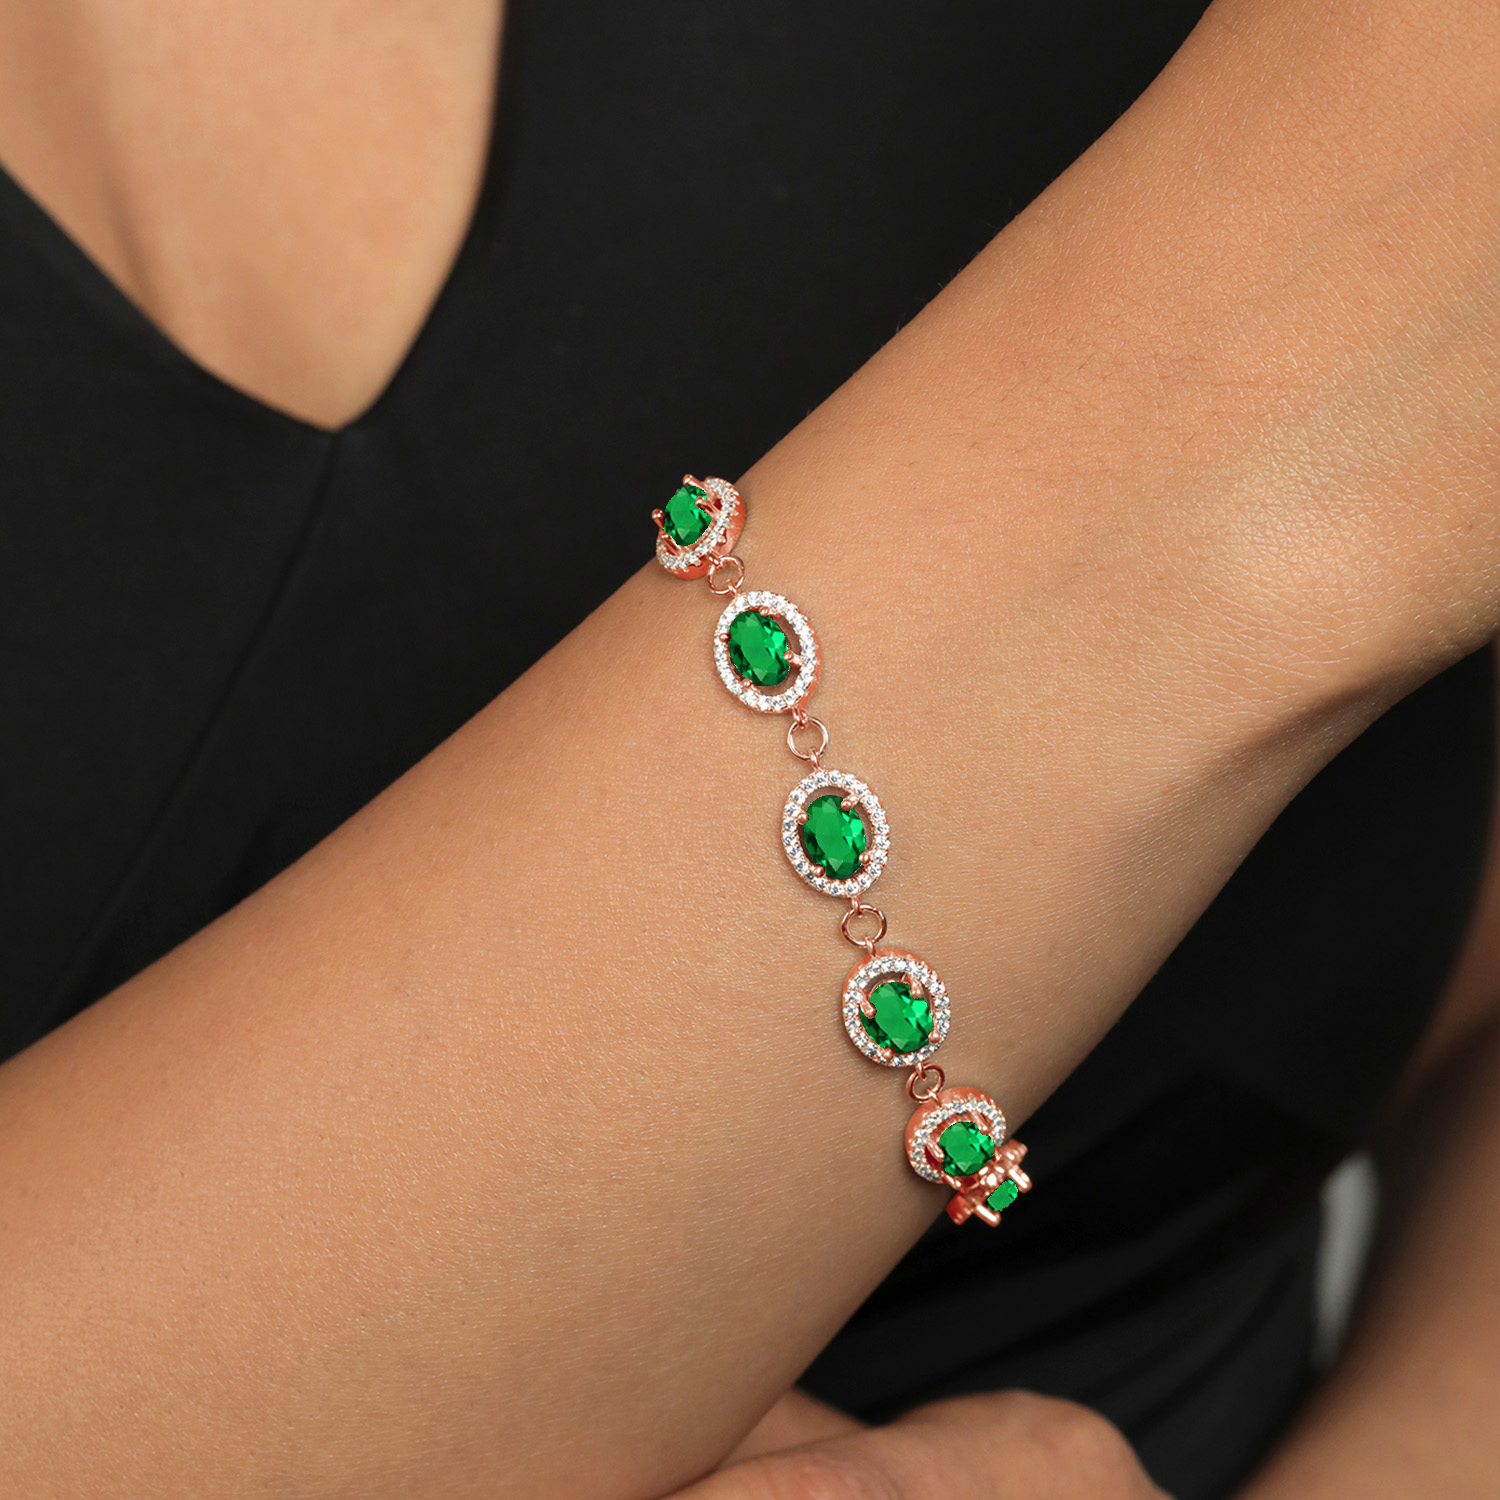 Gem Stone King 8.88 Ct Oval Green Simulated Emerald 18K Rose Gold Plated Silver Bracelet For Women